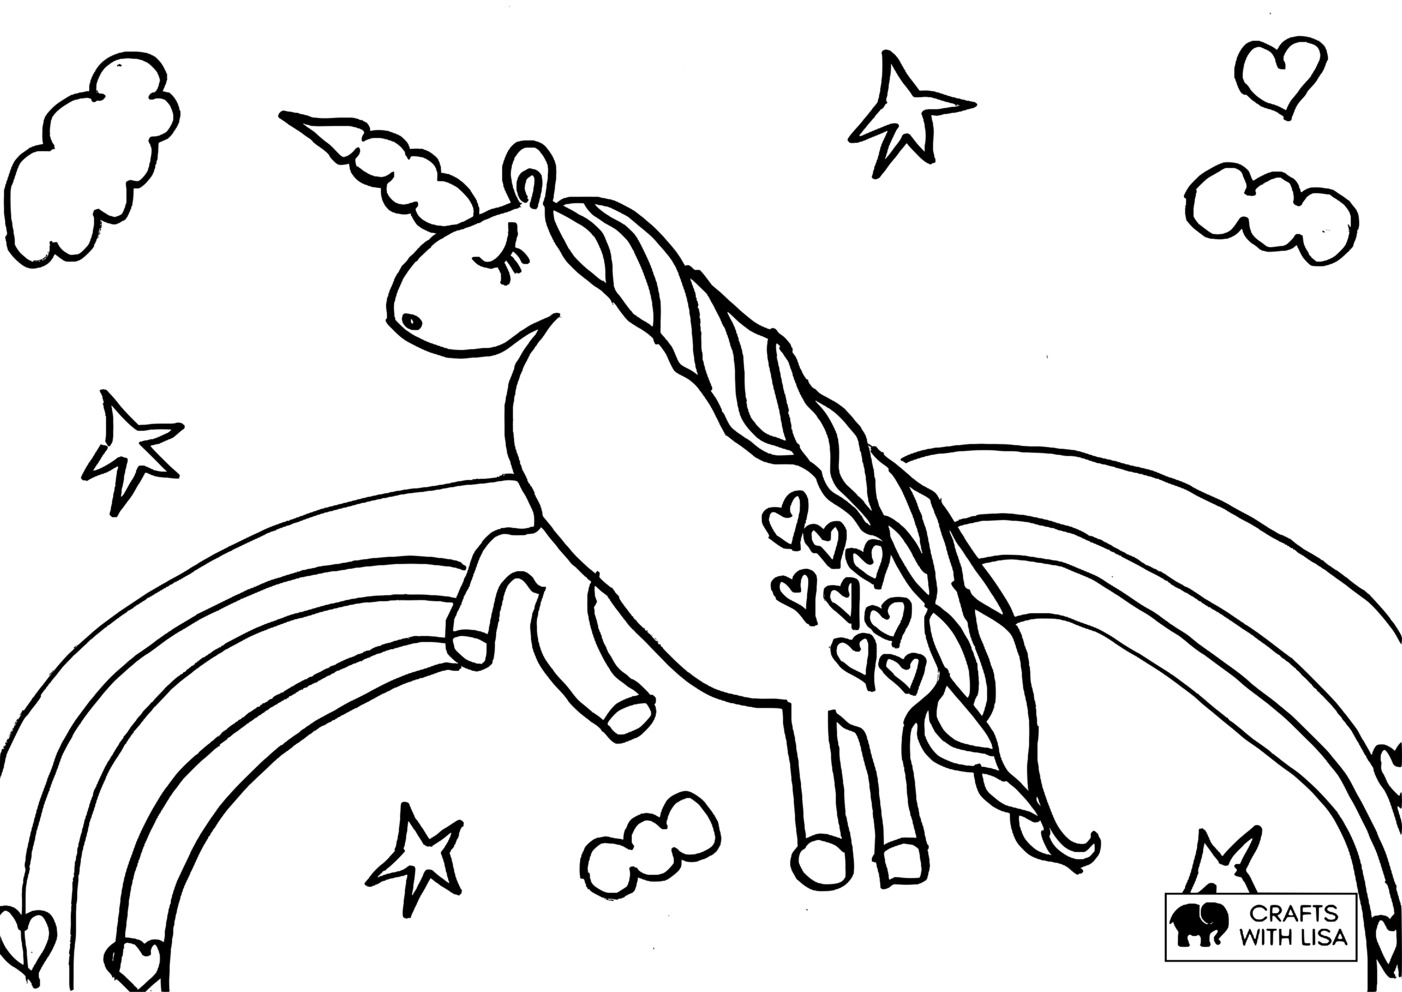 coloring pages of rainbows and unicorns